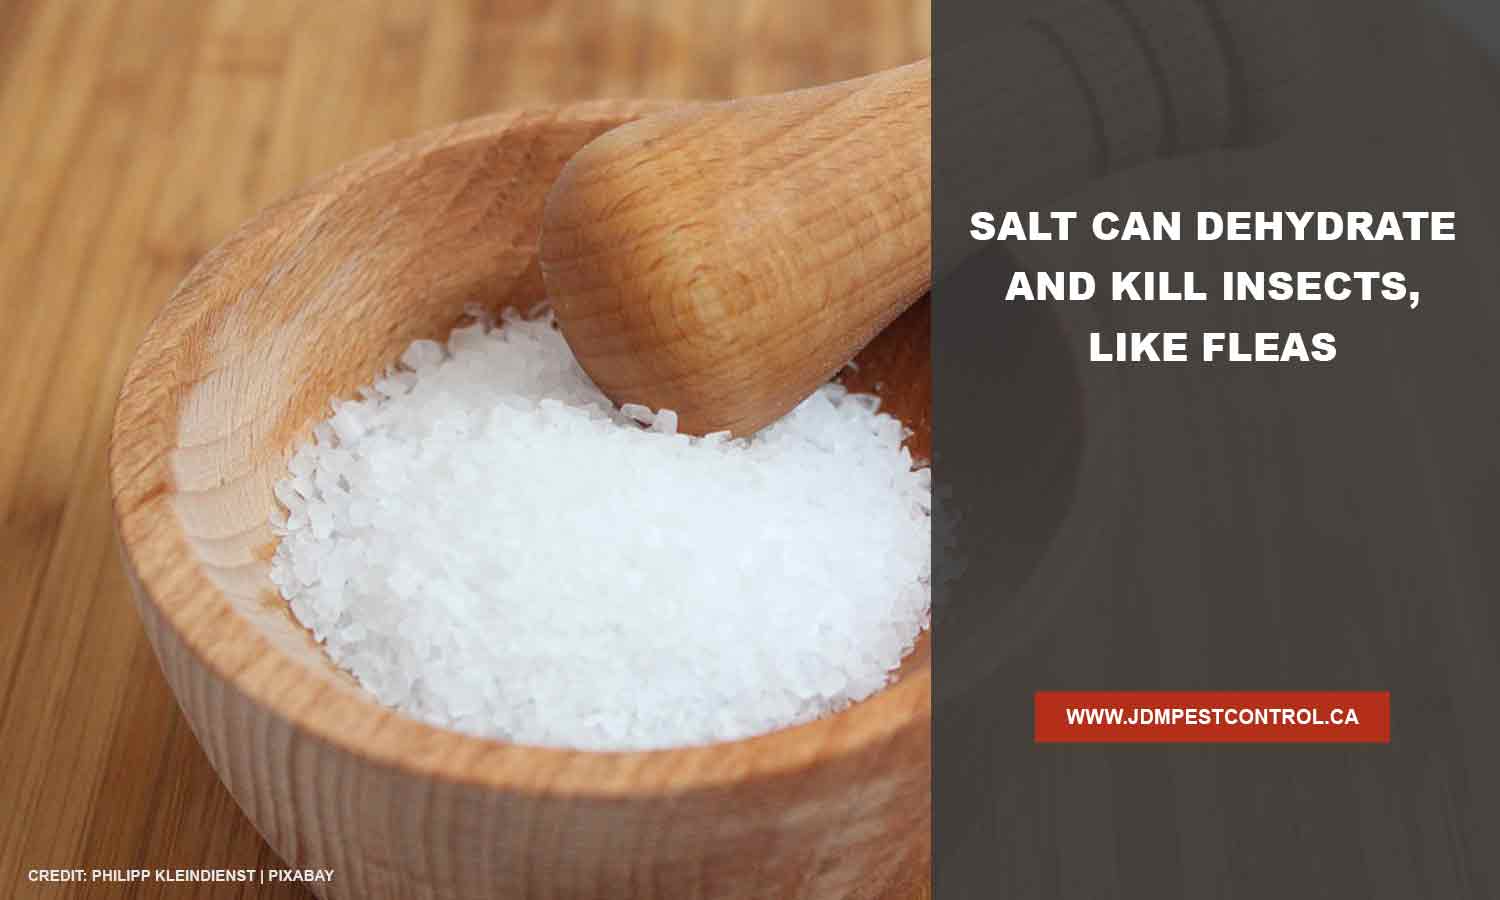 Salt can dehydrate and kill insects, like fleas